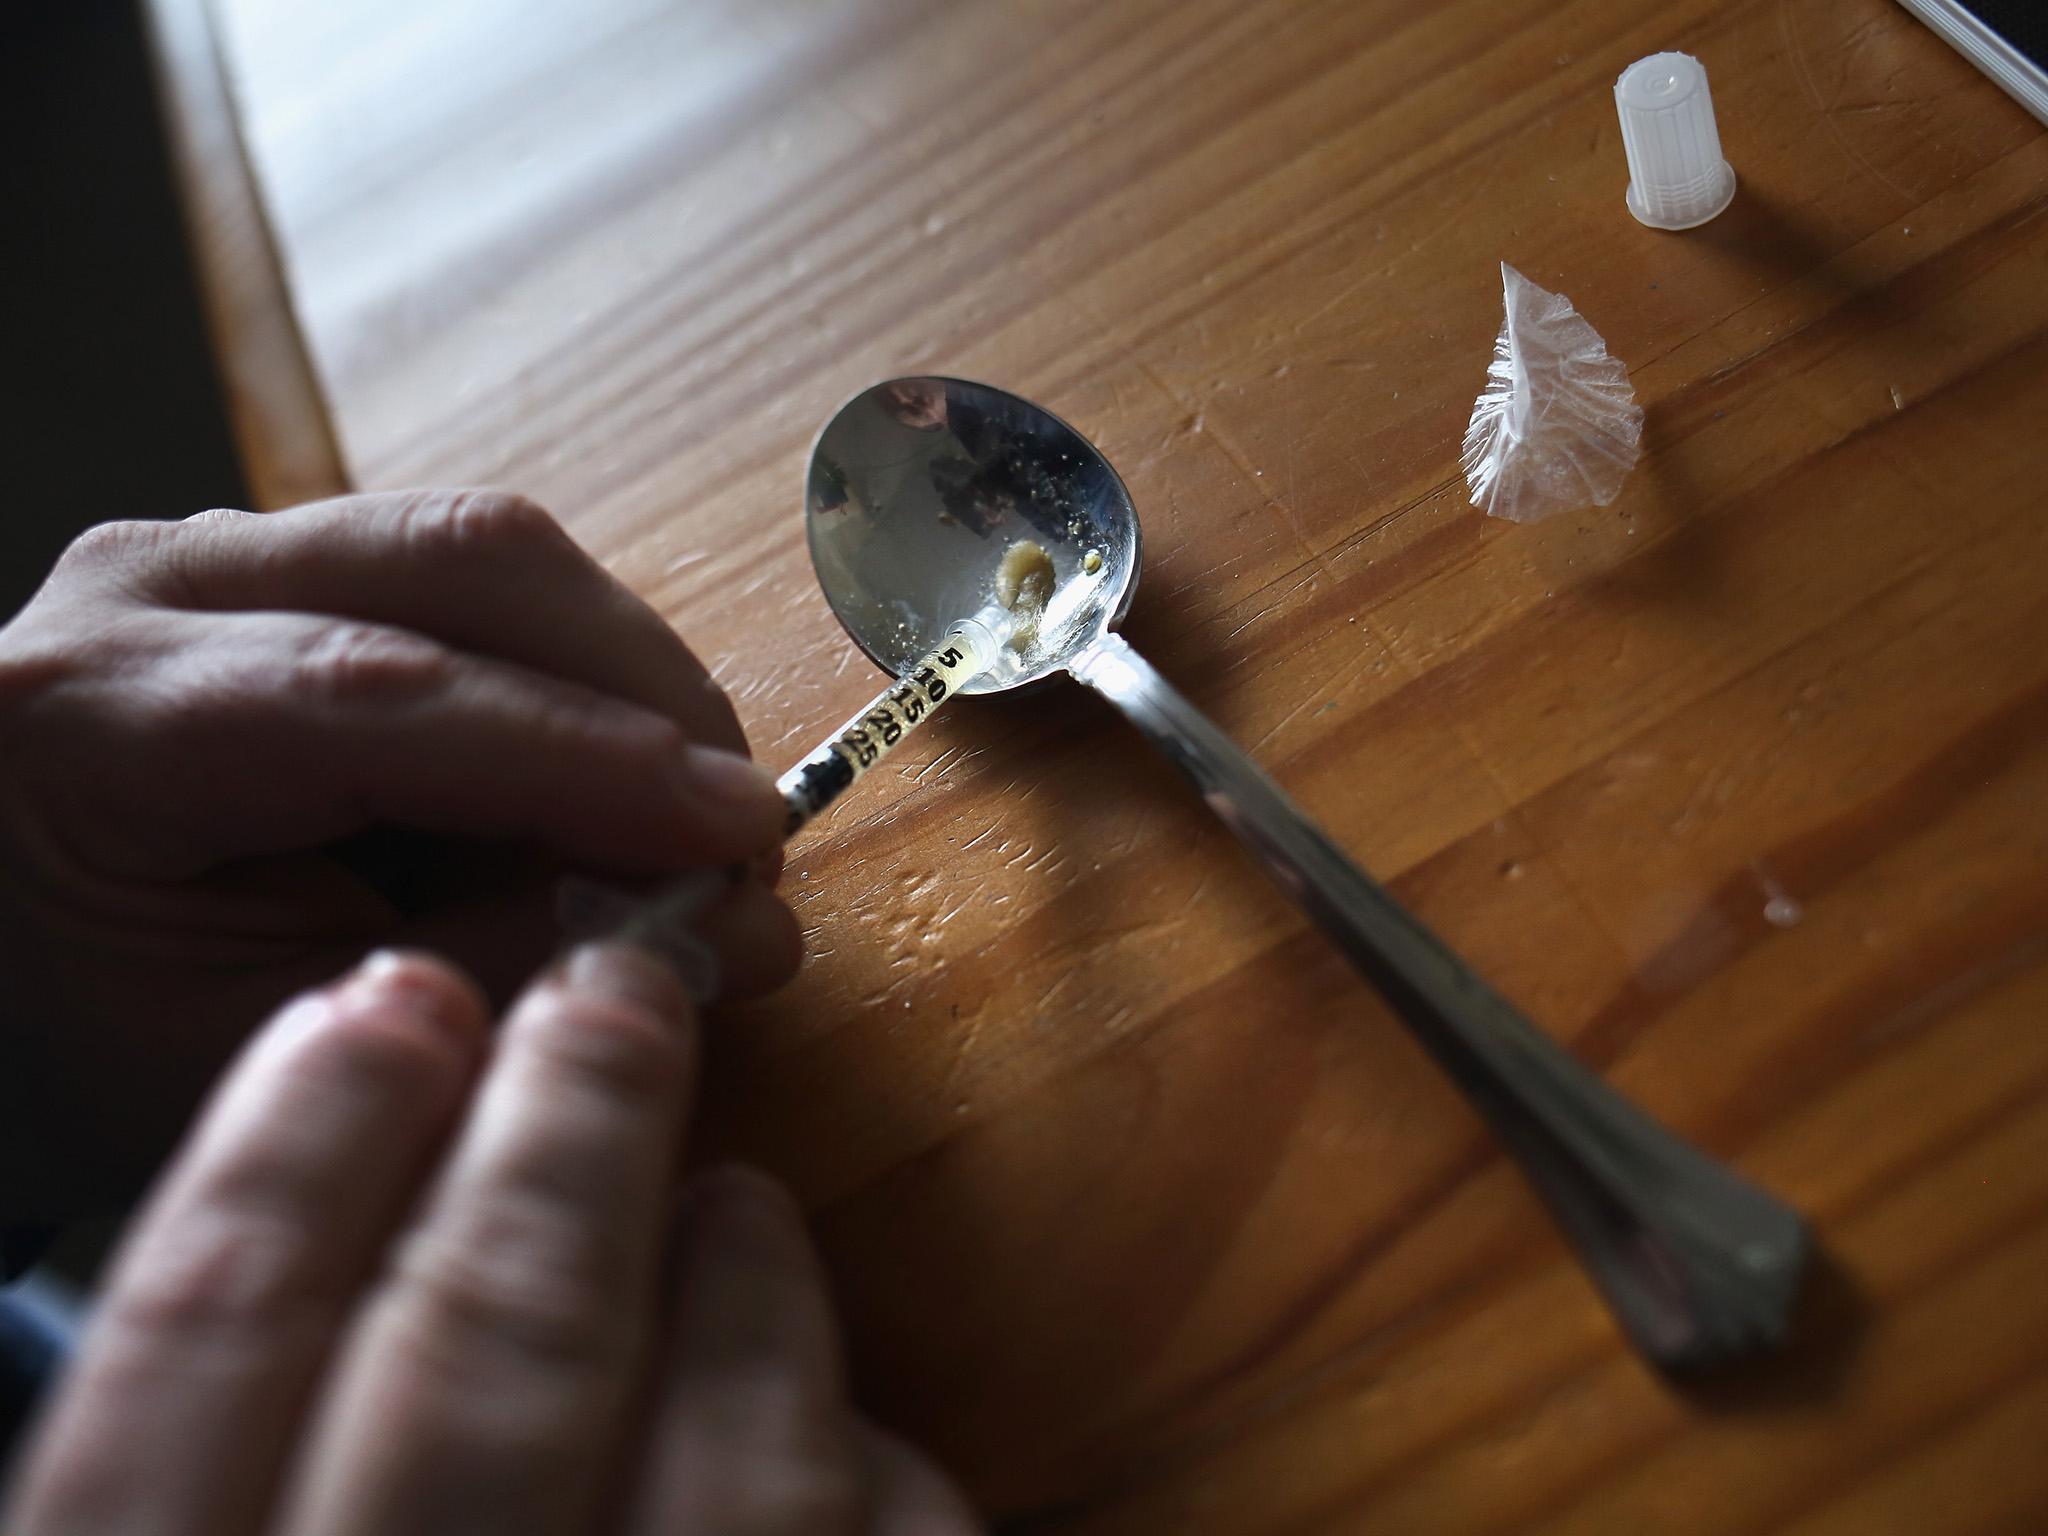 Heroin is among the drugs being supplied along 'county lines' from cities into the countryside